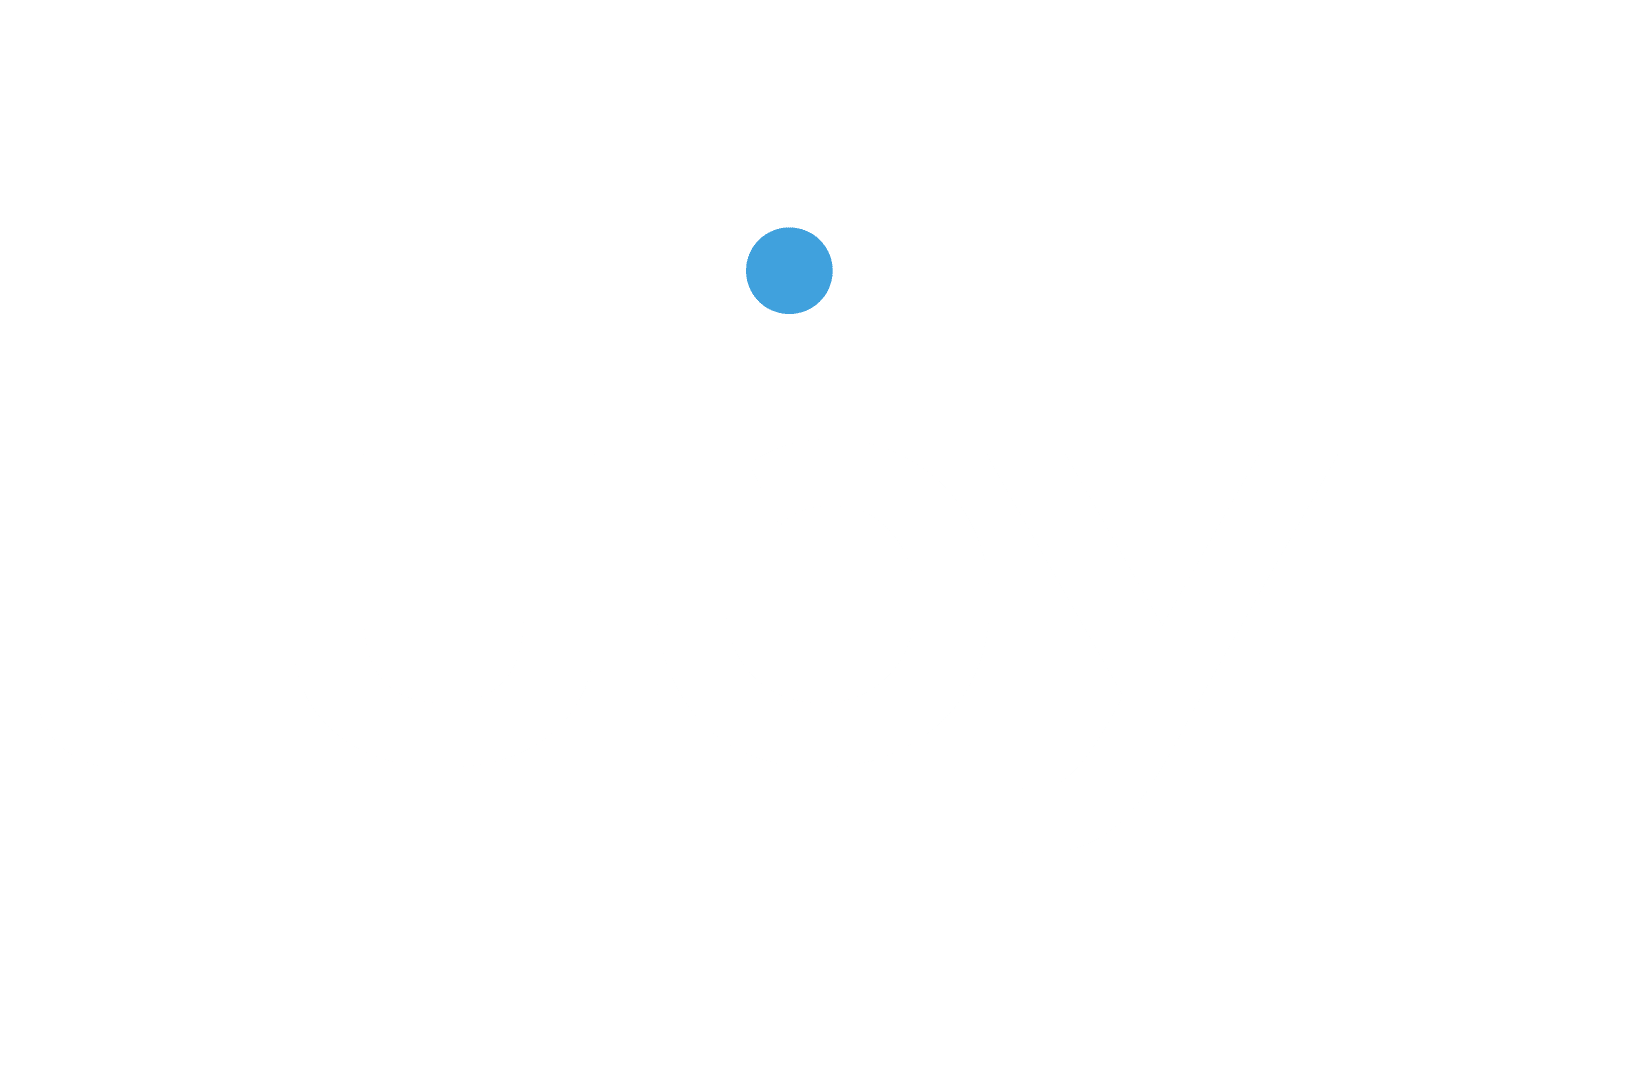 Embedded Finance Luby Software